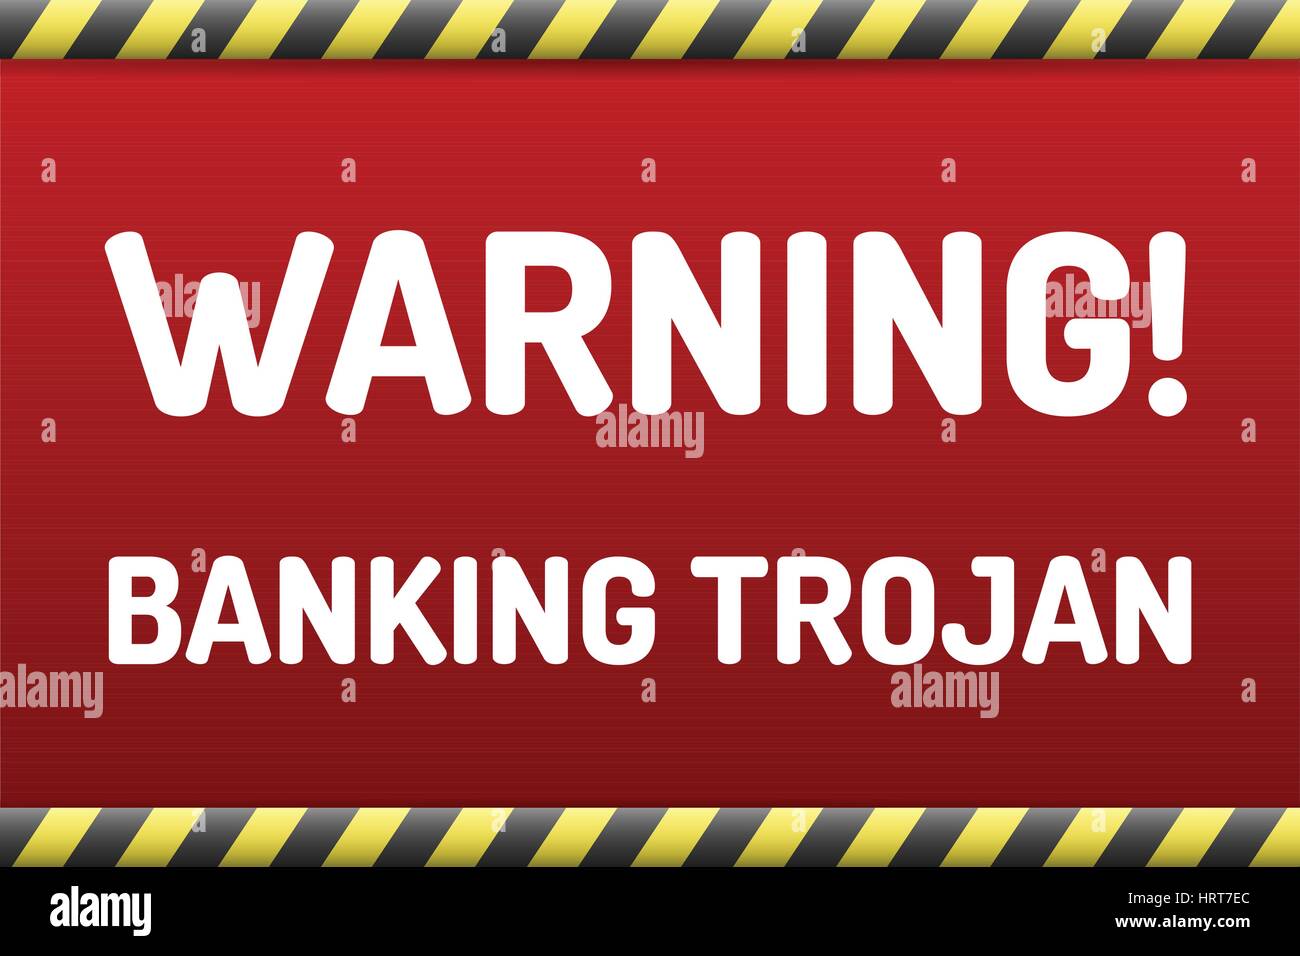 Banking Trojan - Warning sign - bank account hacking, email viruses and fraud concept Stock Vector